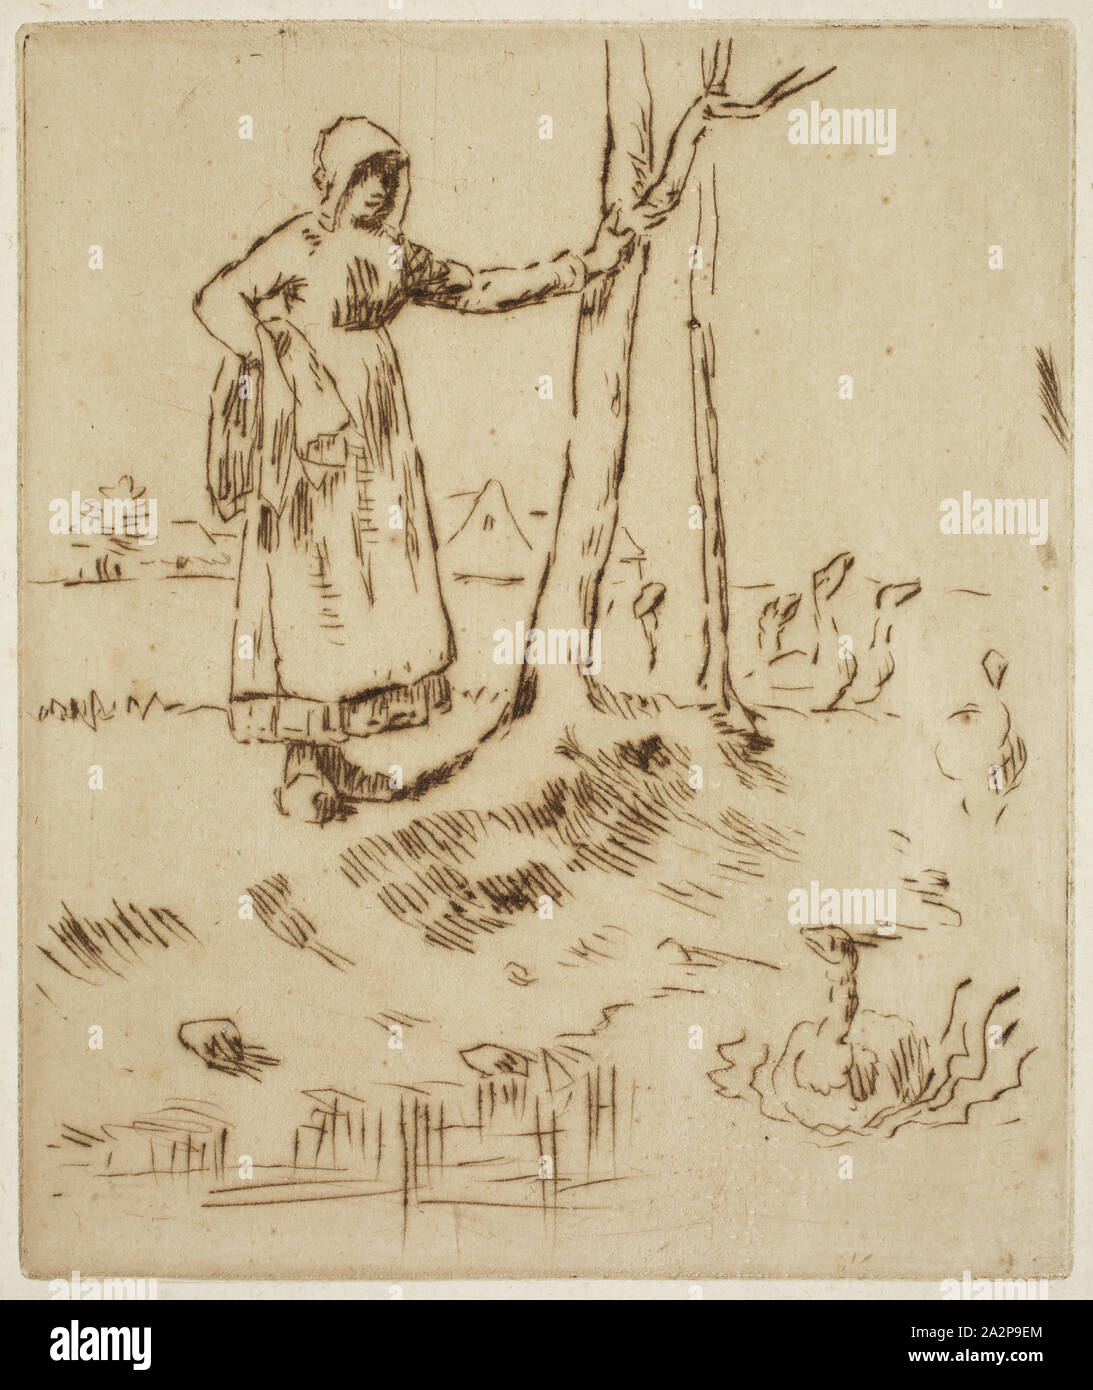 Jean-François Millet, French, 1814-1875, La Gardeuse d'oies, between 1855 and 1856, drypoint printed in brown ink on laid paper, Plate: 5 5/8 × 4 3/4 inches (14.3 × 12.1 cm Stock Photo